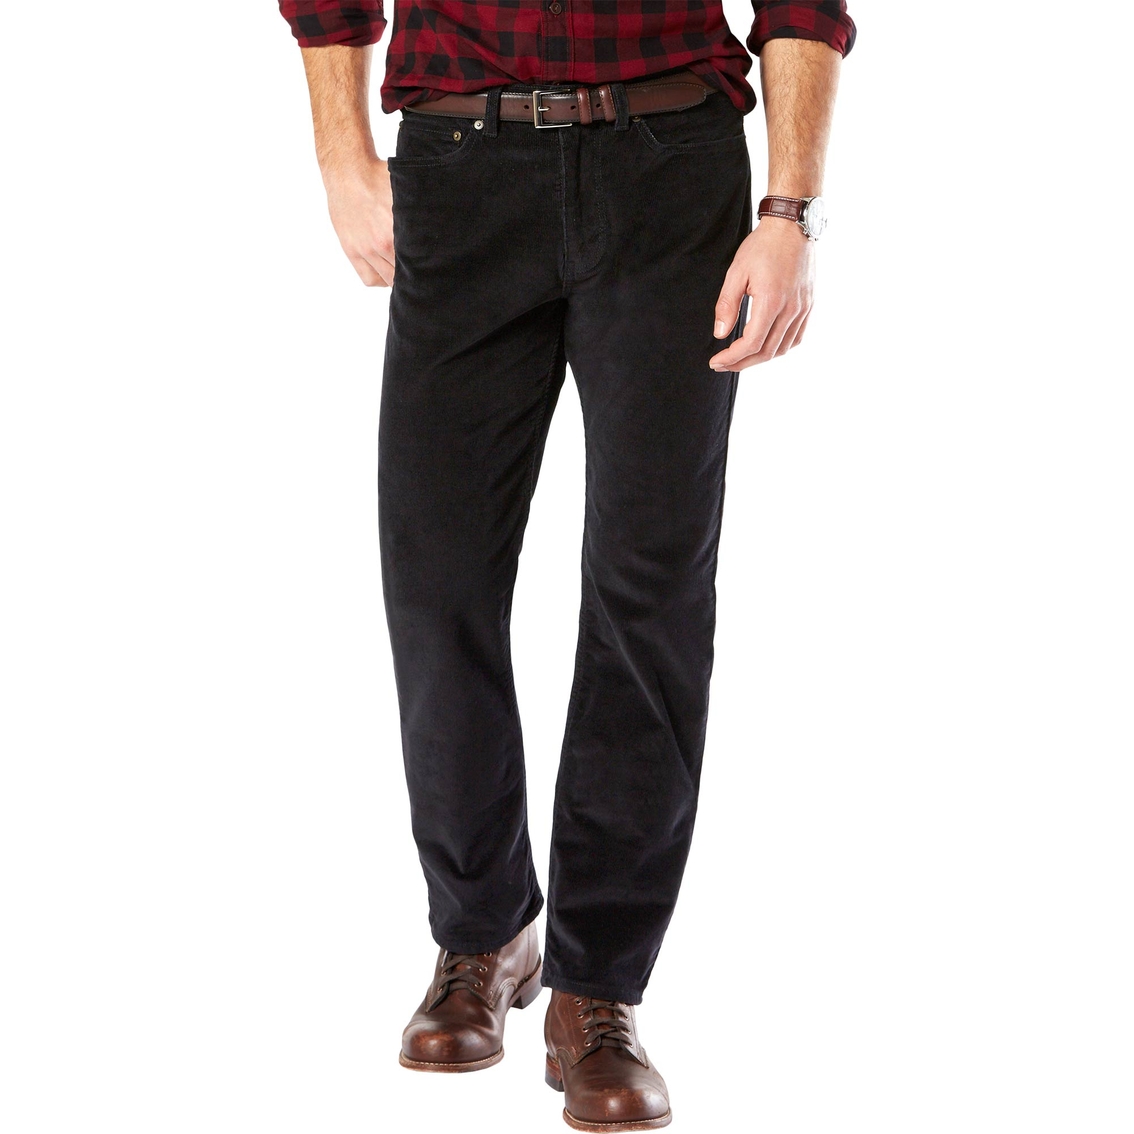 Dockers Jean Cut Straight Fit Softstretch Pants | Pants | Clothing ...